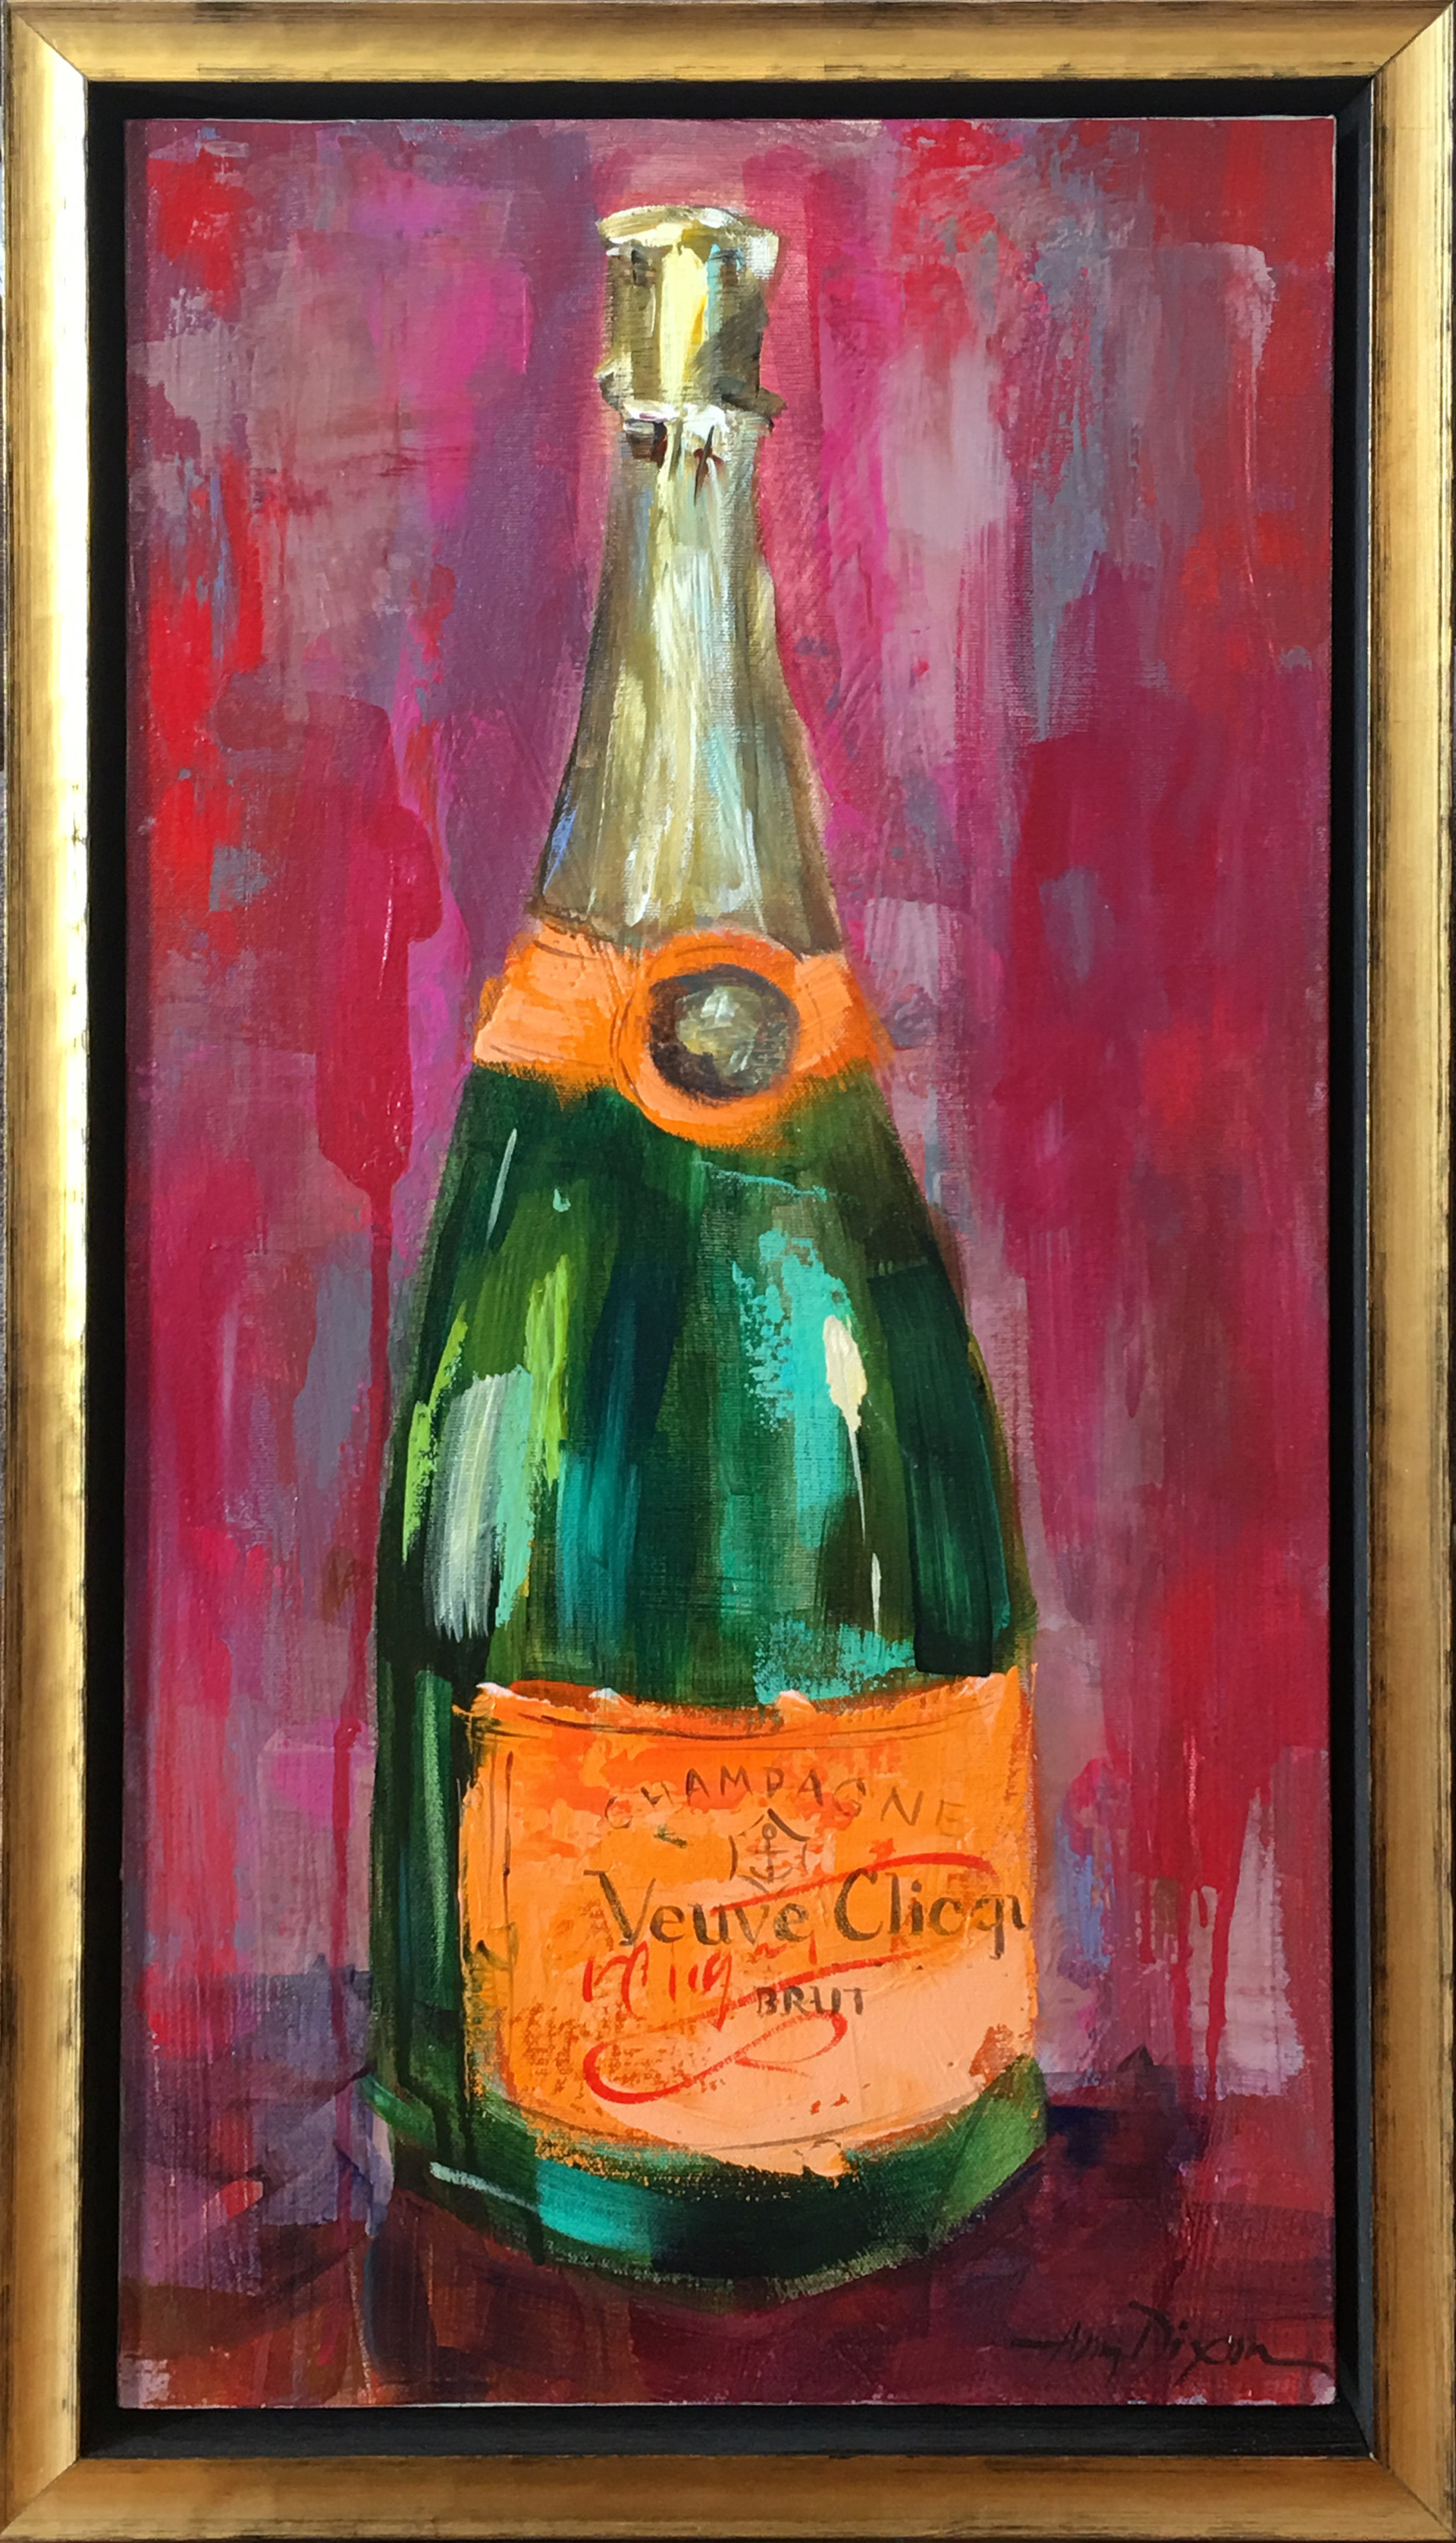 Veuve You Too! by Amy Dixon